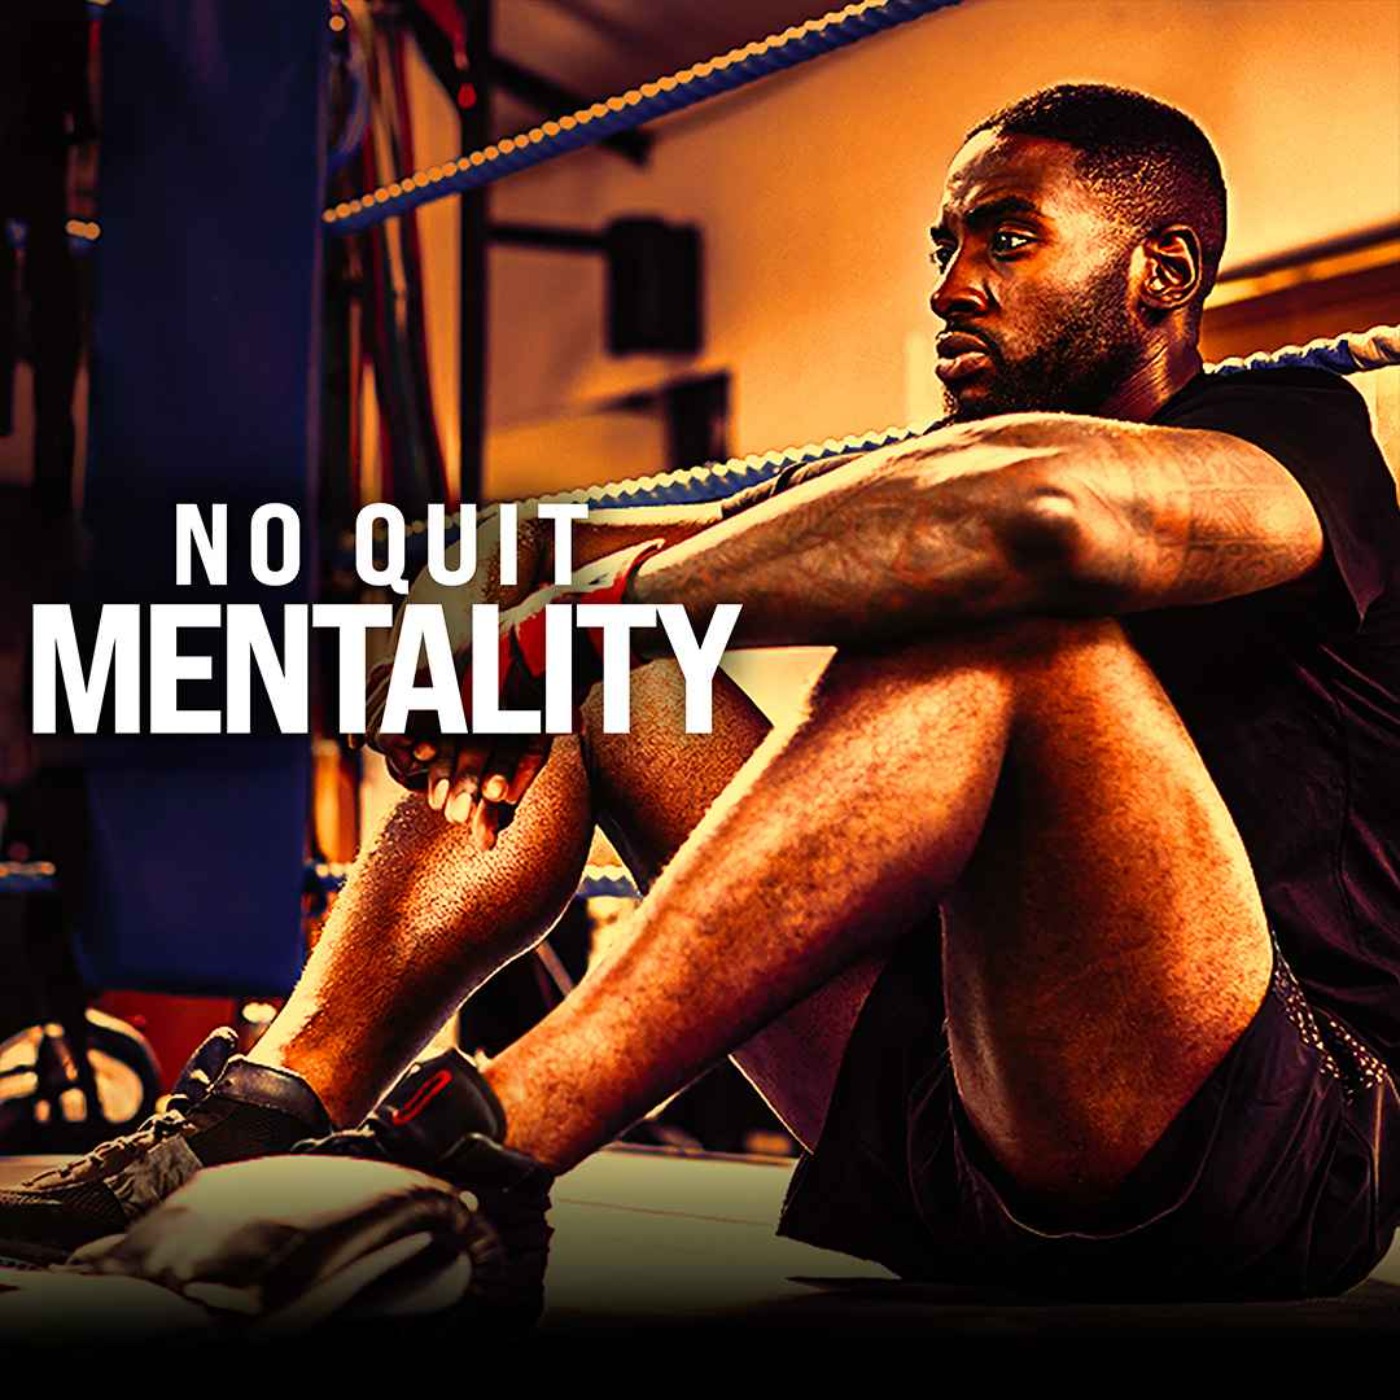 THE NO QUIT MENTALITY - Powerful Motivational Speech (ft Marcus Taylor)